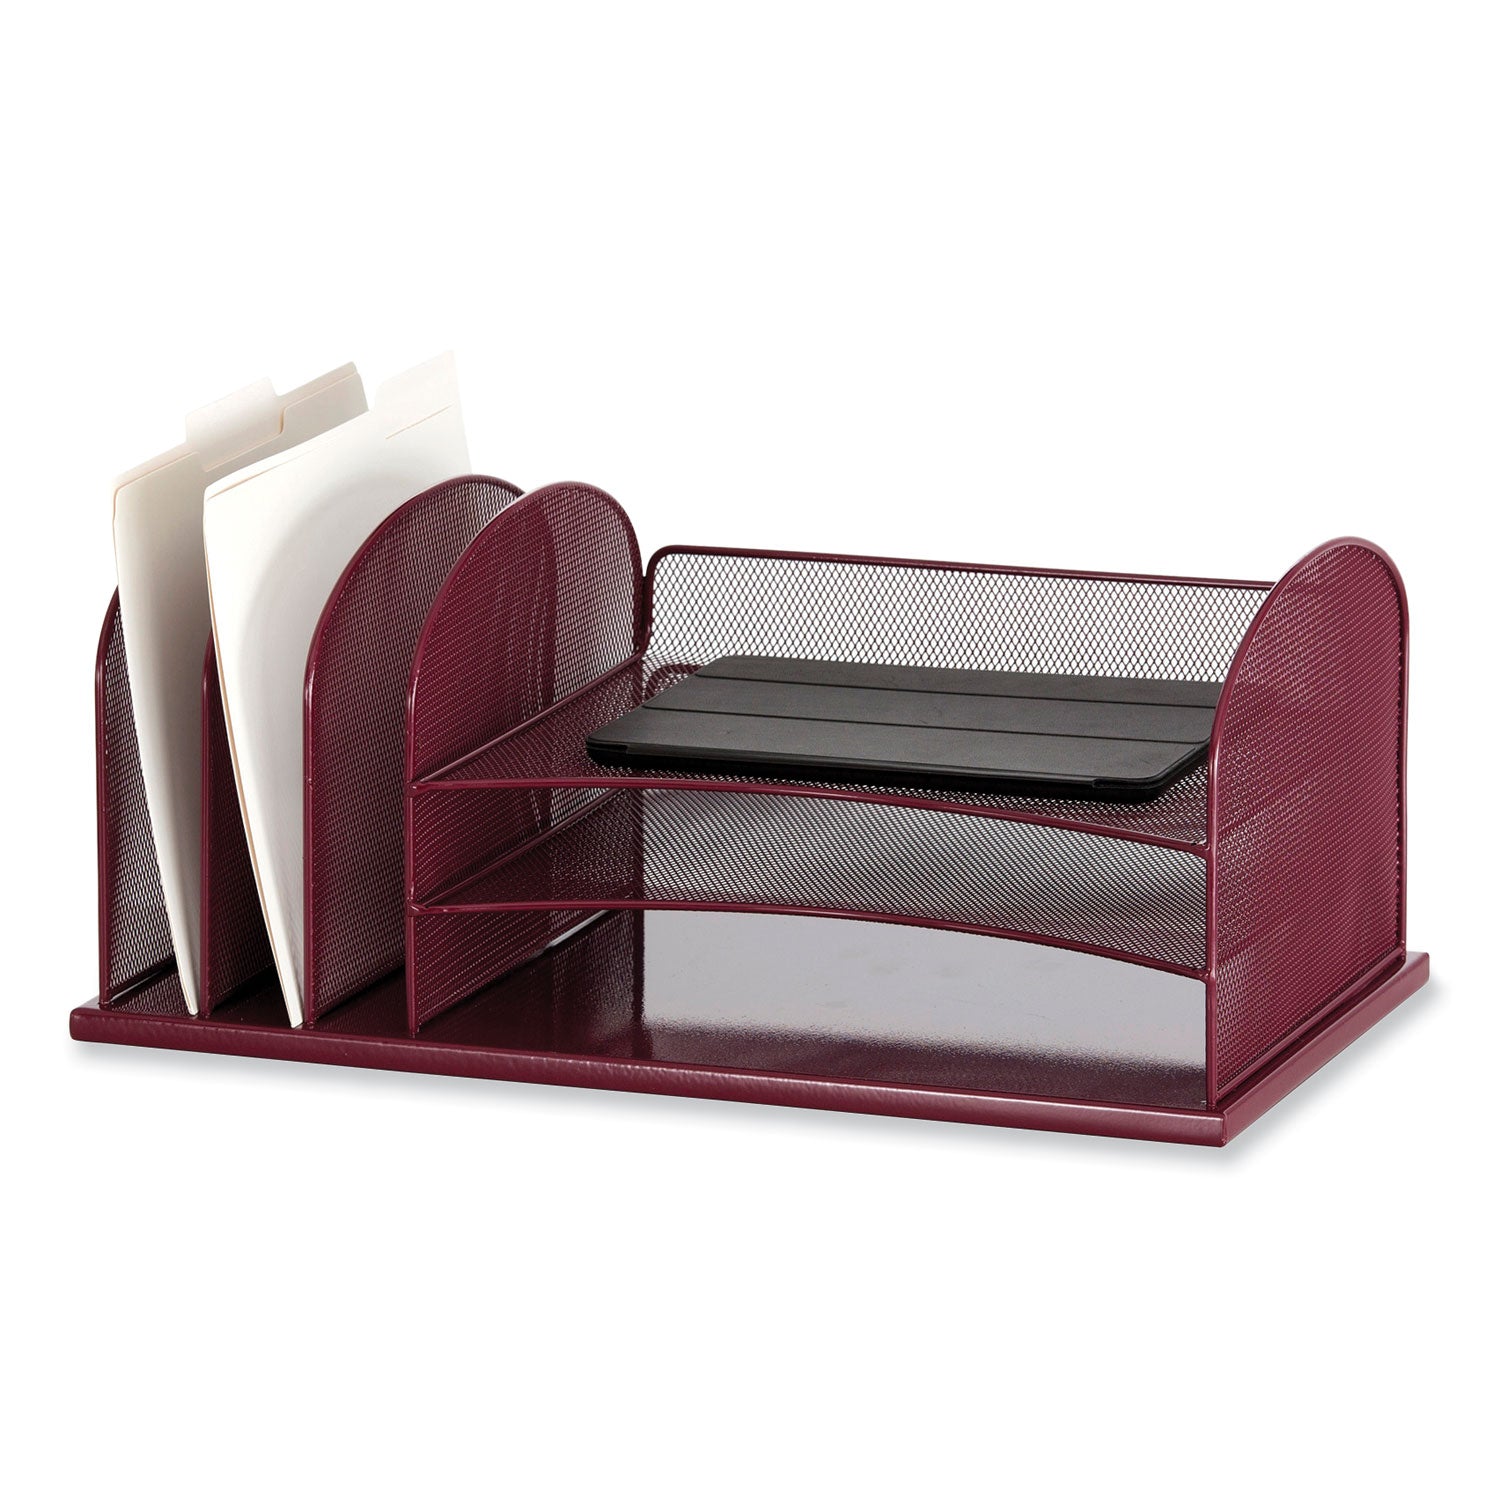 onyx-desk-organizer-w-three-horizontal-and-three-upright-sectionsletter-size1925x115x825wineships-in-1-3-business-days_saf3254we - 1